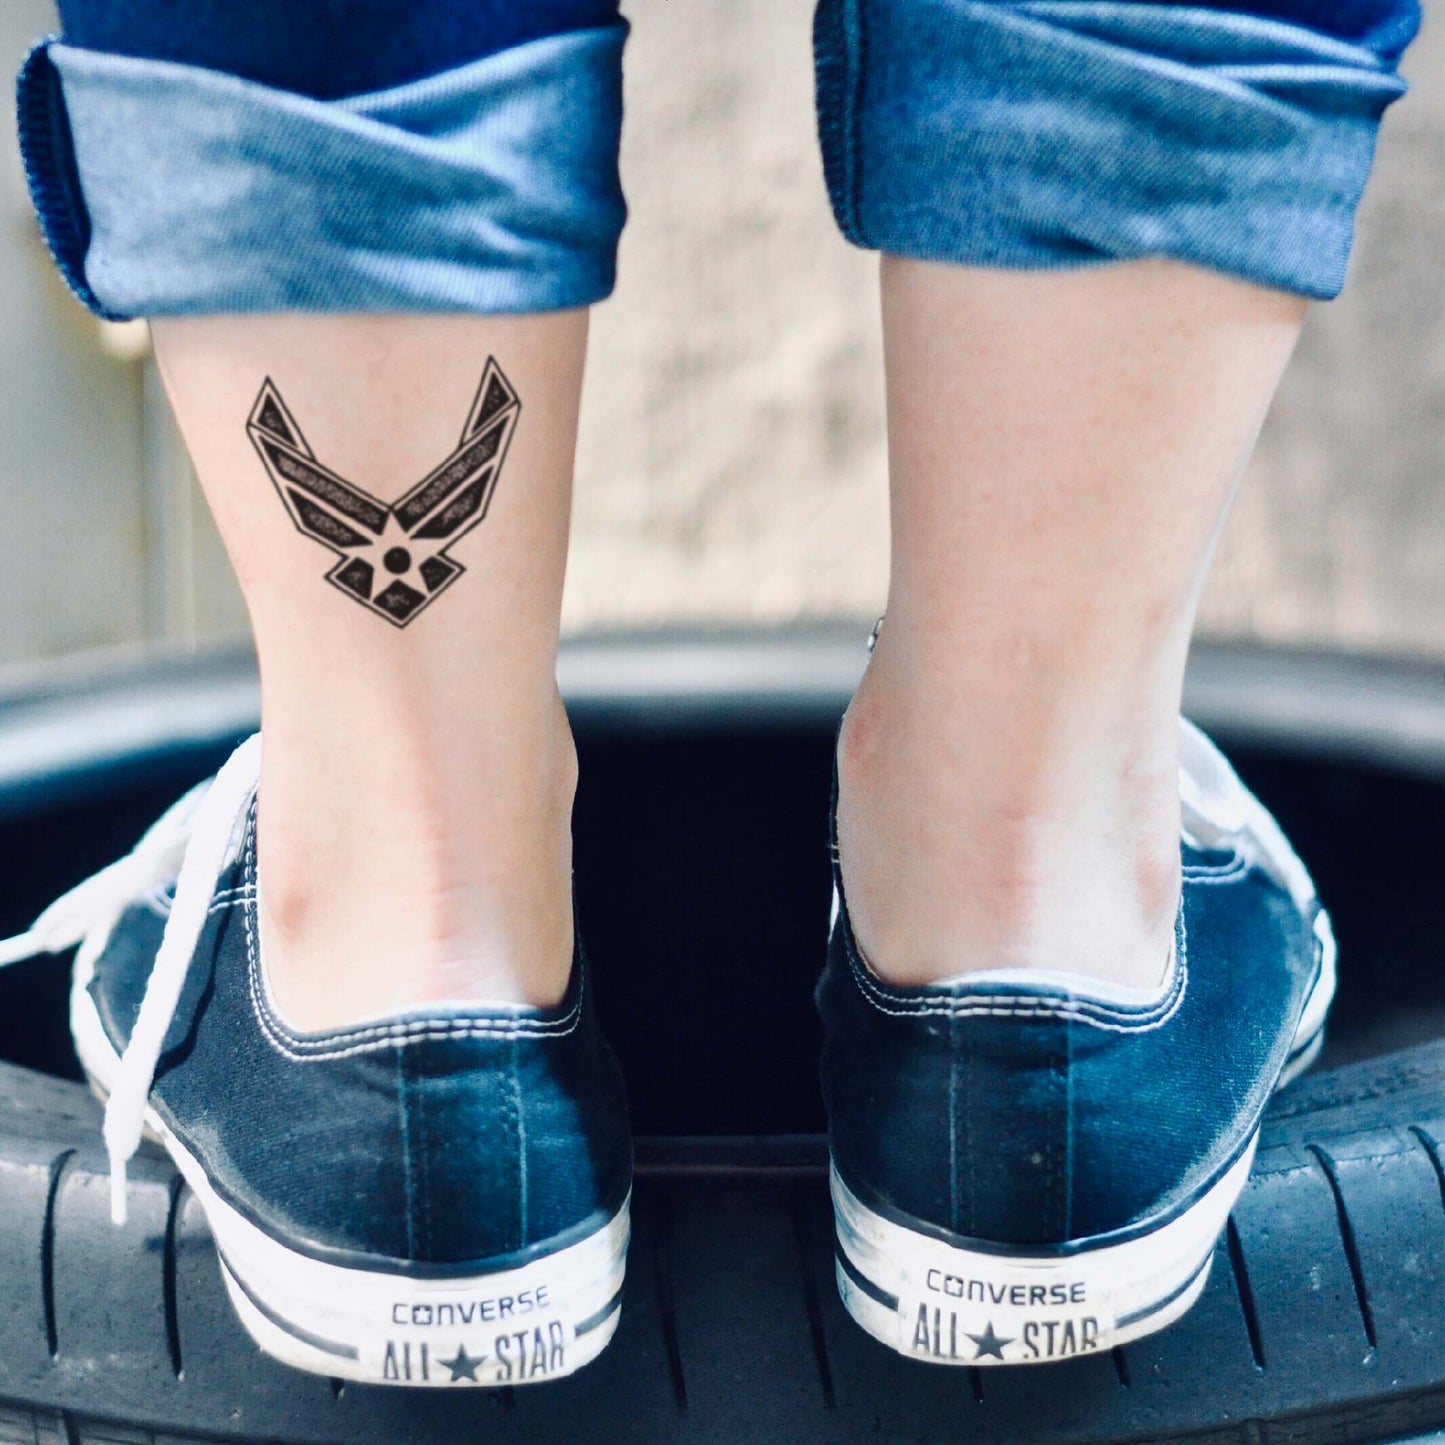 fake small us air force airforce usaf logo temporary tattoo sticker design idea on leg ankle